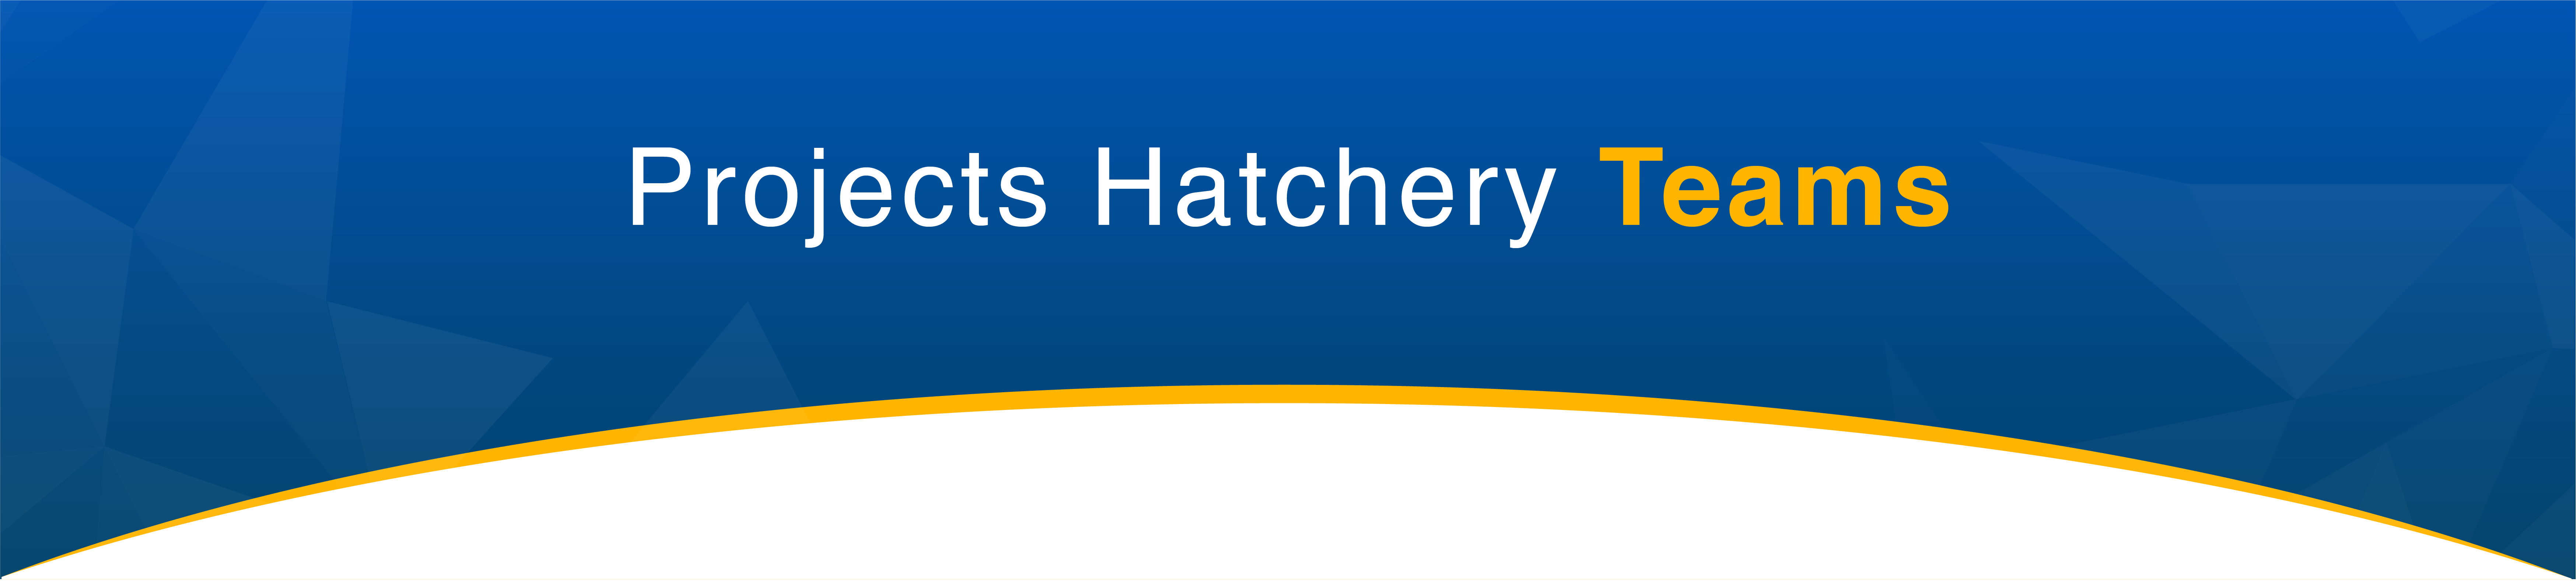 Projects Hatchery Banner on blue background